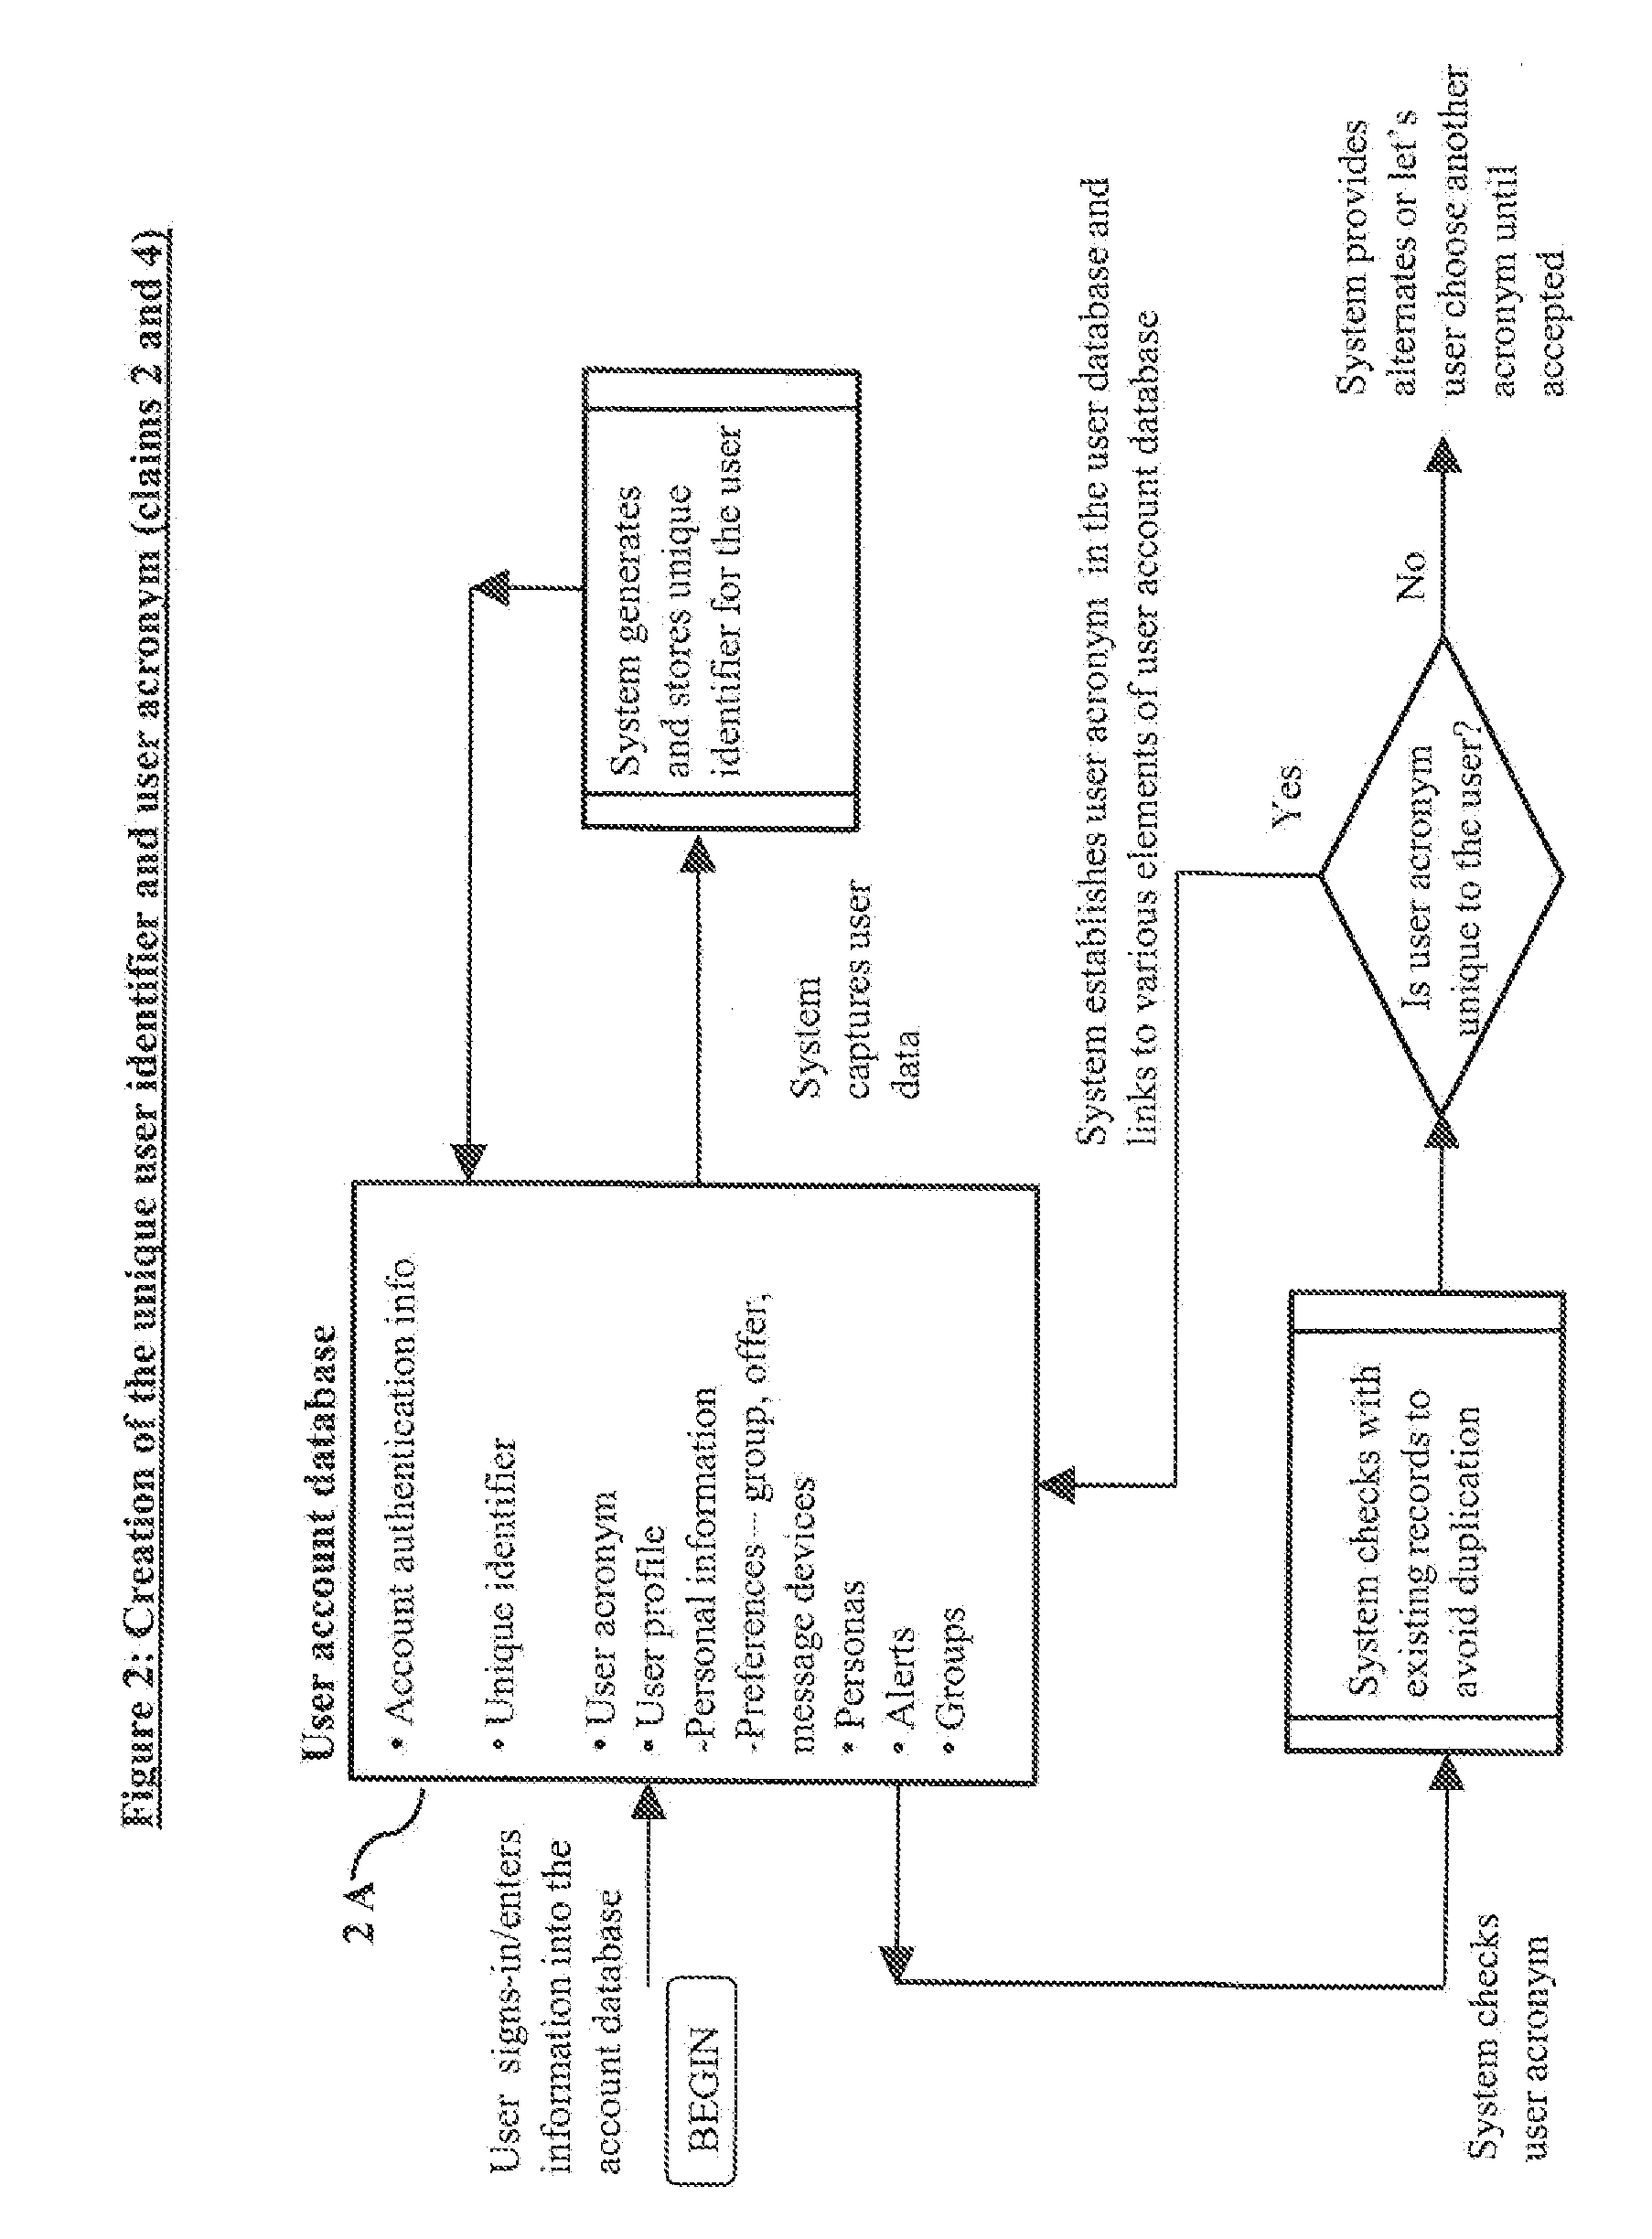 System and method for interactively connecting users and third party providers to individual or aggregated to-do list task items of users within the task management system